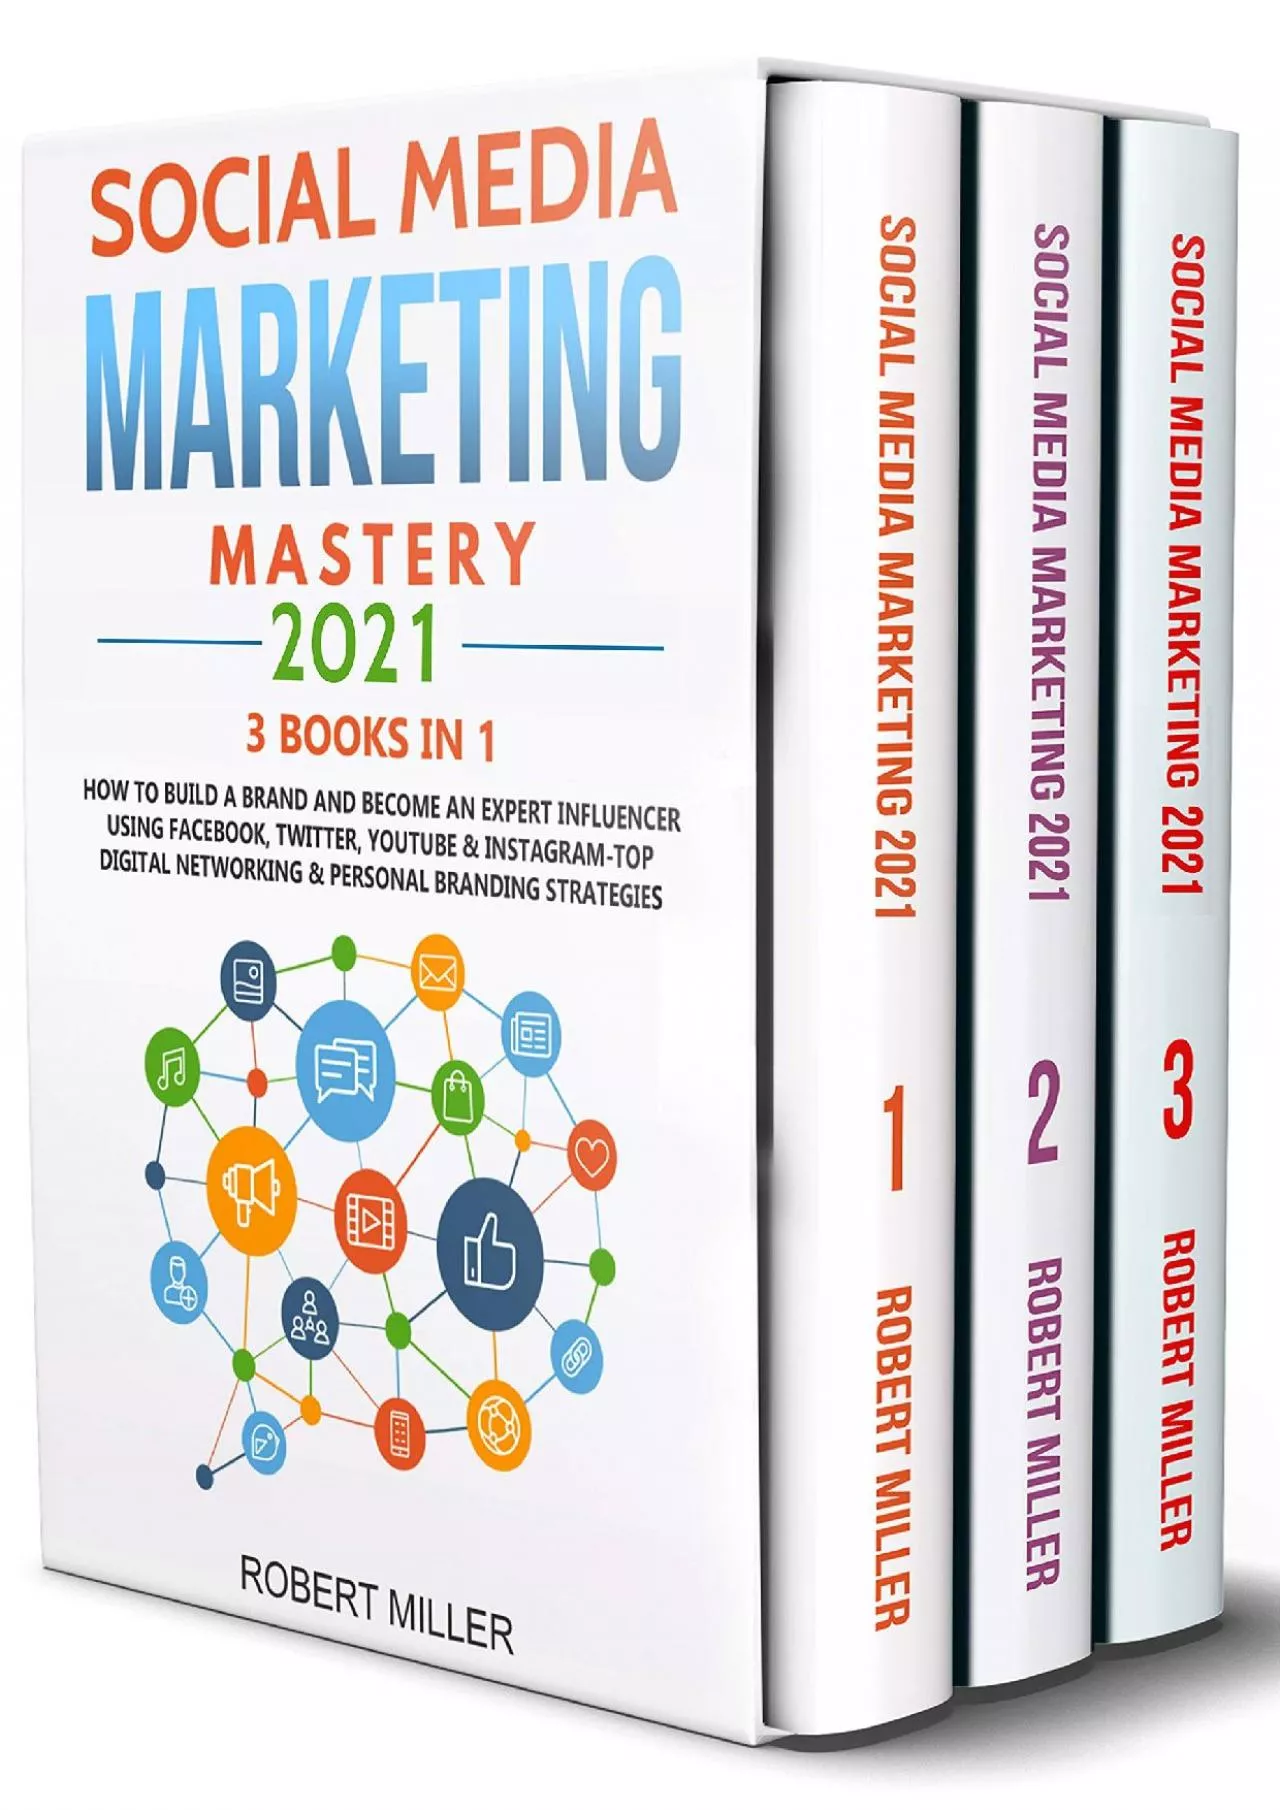 Social Media Marketing Mastery 2021:3 BOOKS IN 1-How to Build a Brand and Become an Expert